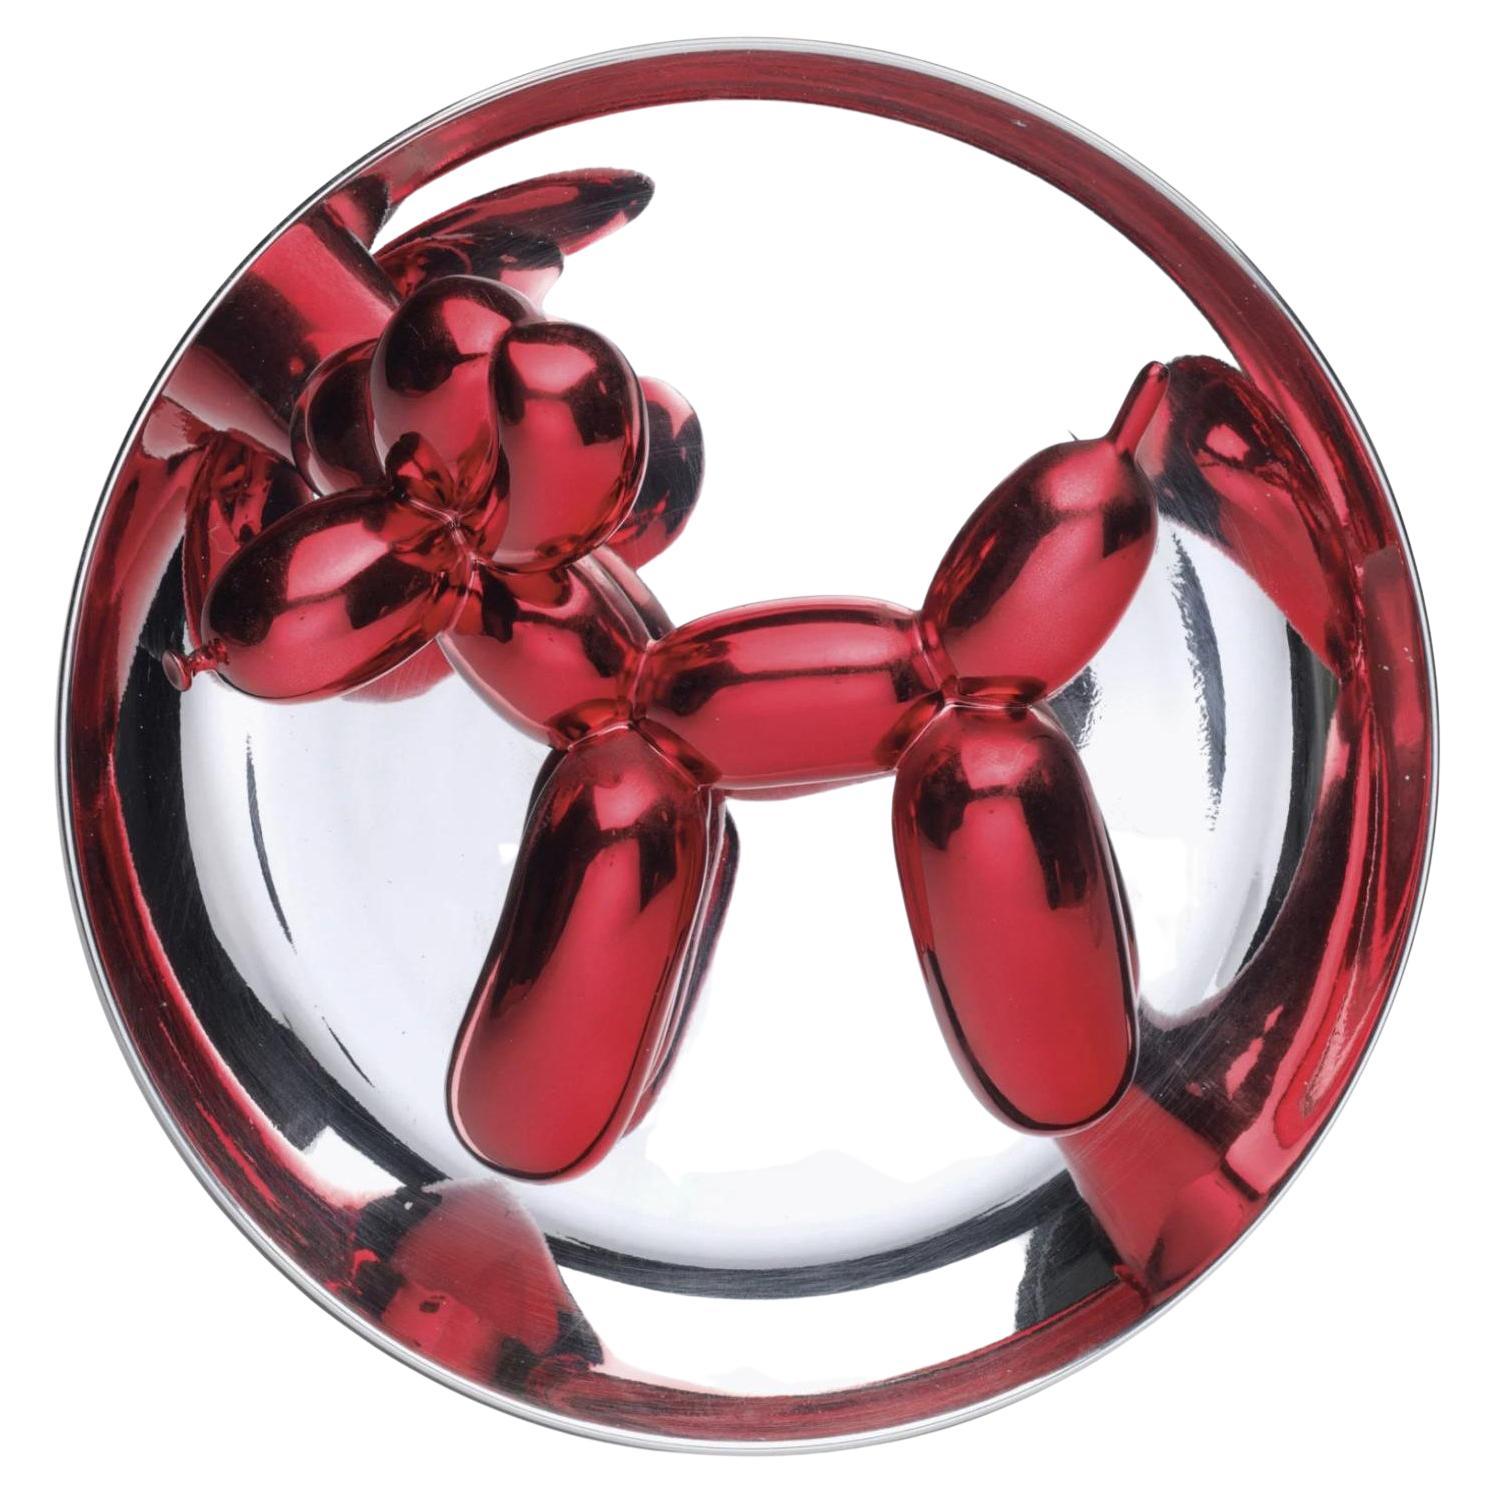 Balloon Dog 'Red; 1995 Edition' by Jeff Koons